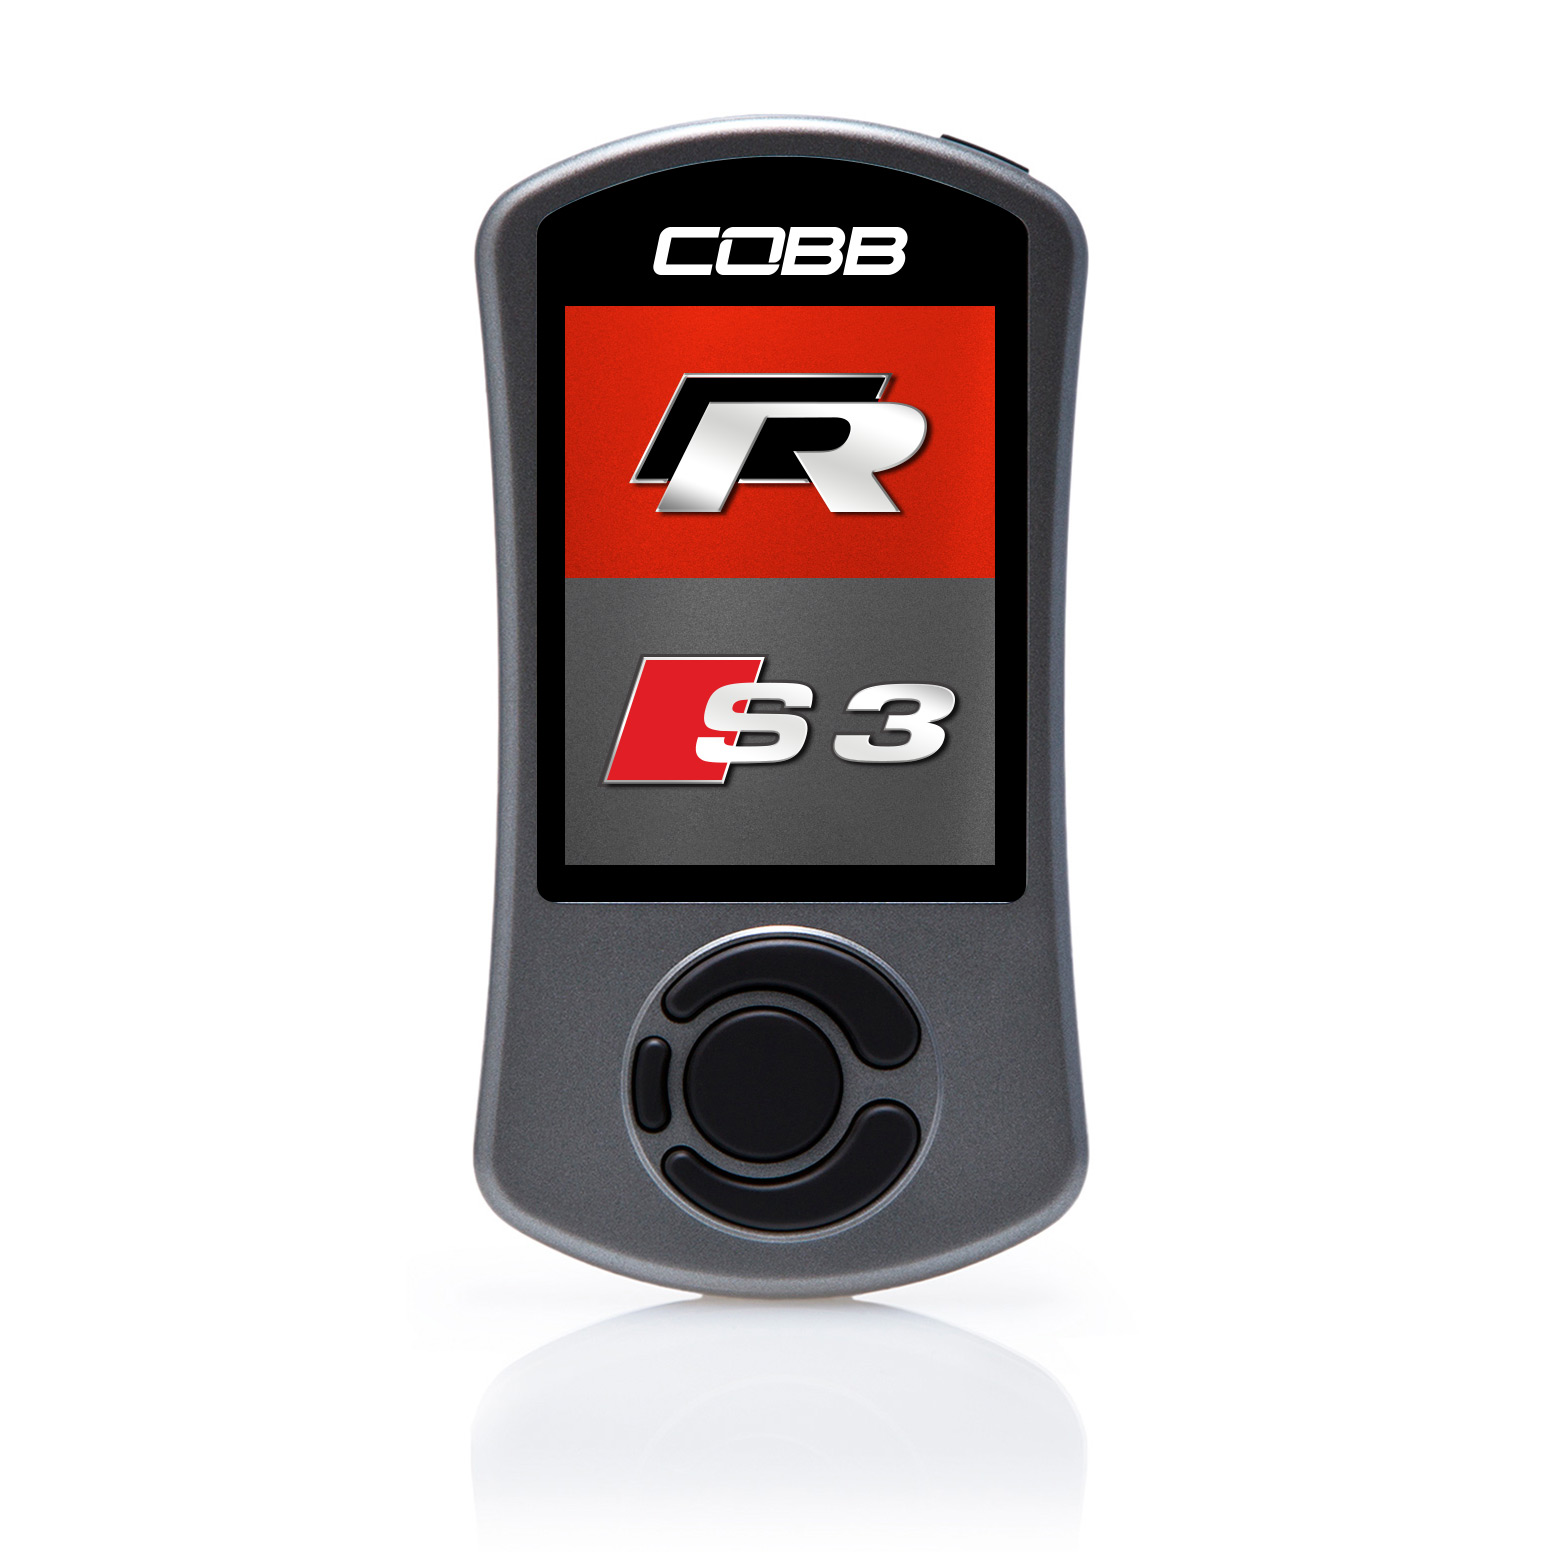 COBB Tuning - Accessport with DSG / S tronic Flashing for 